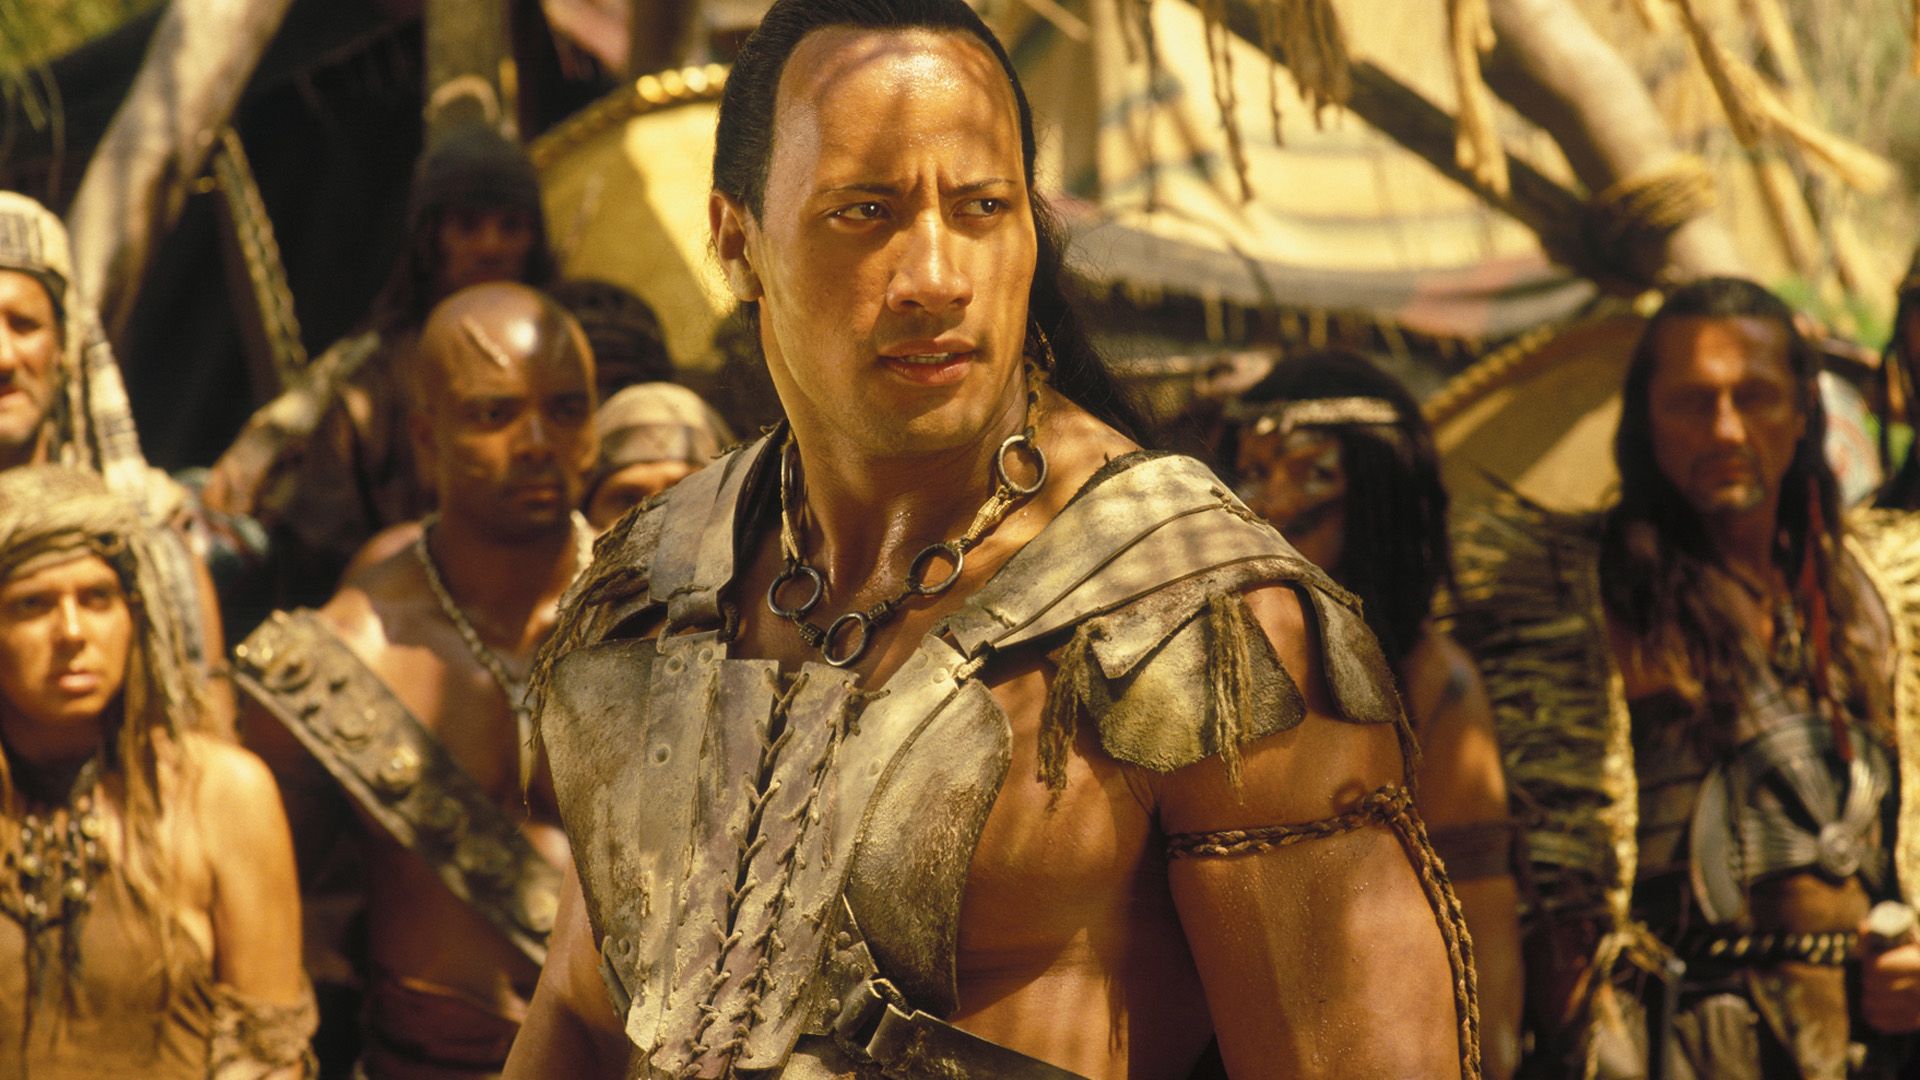 10 Roles Of The Rock That Everyone Forgets About